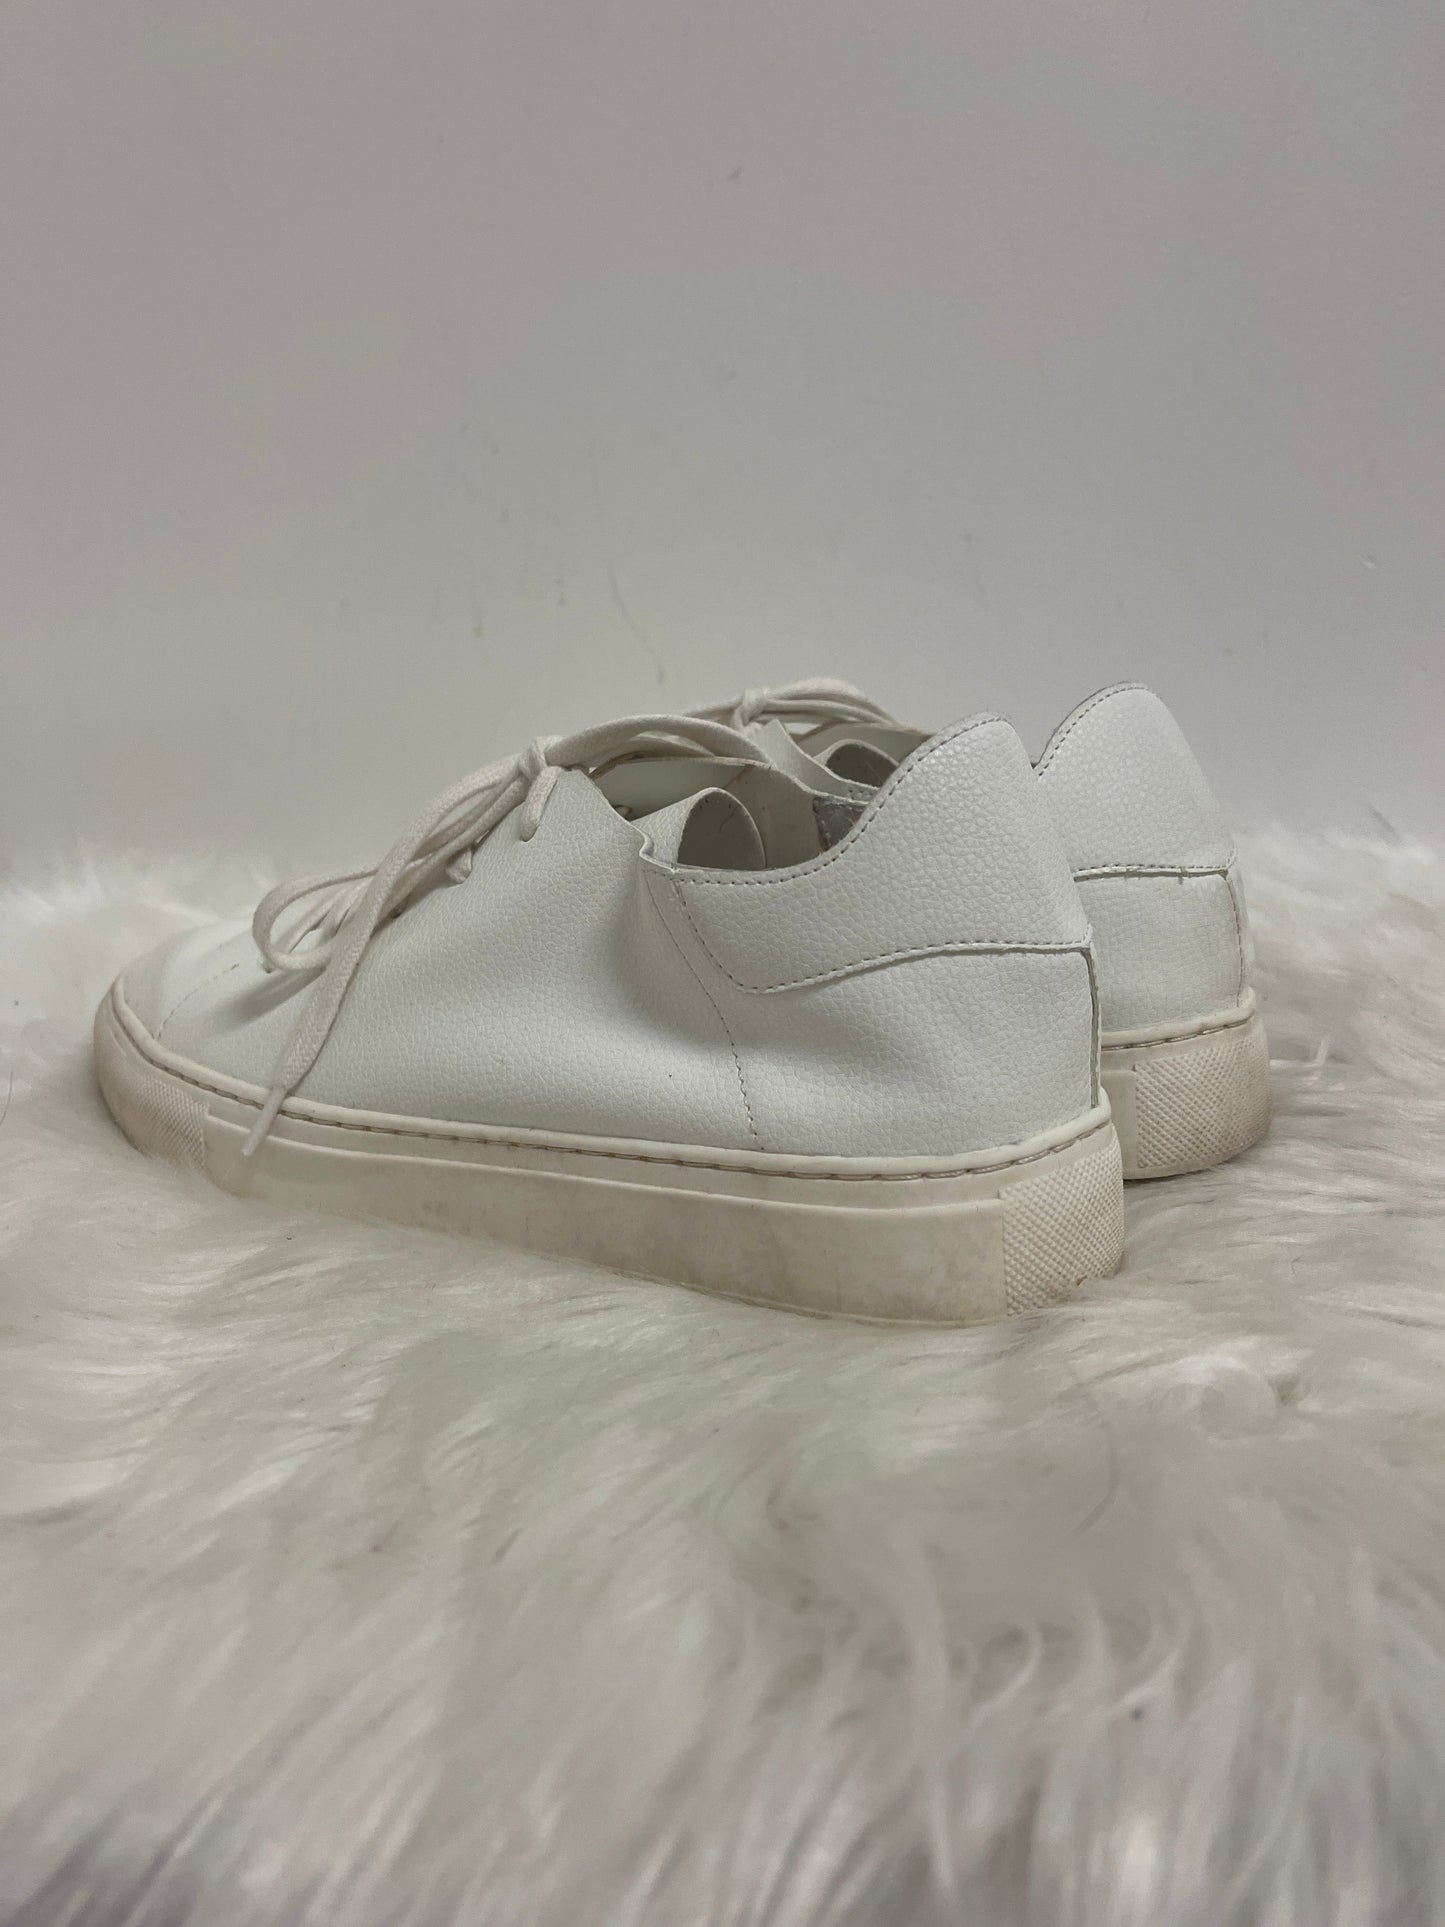 White Shoes Sneakers Wonderly, Size 9